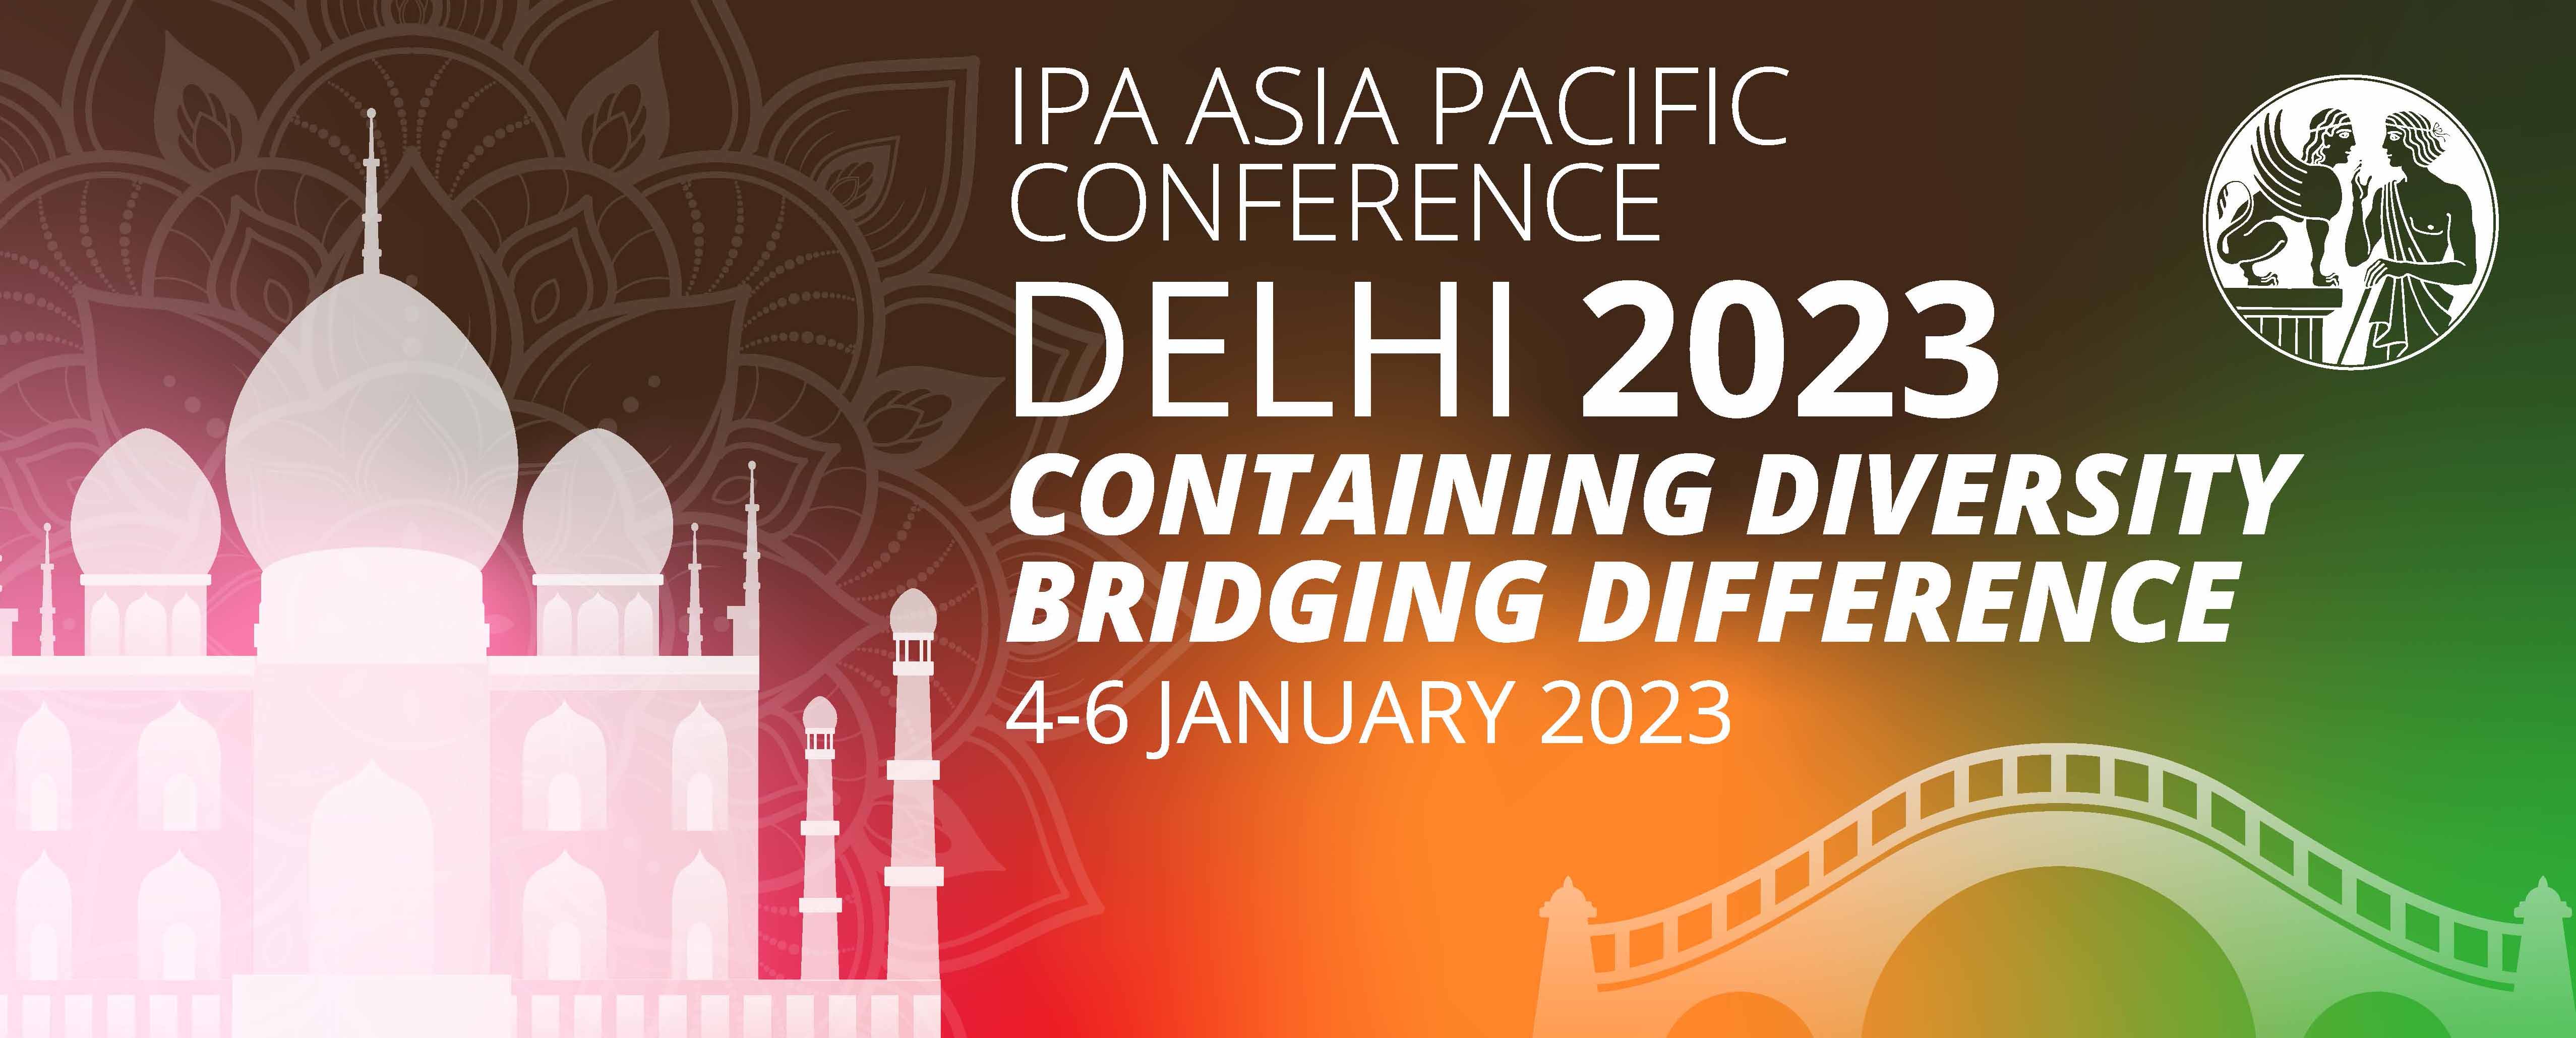 Display event IPA AsiaPacific Conference 2023